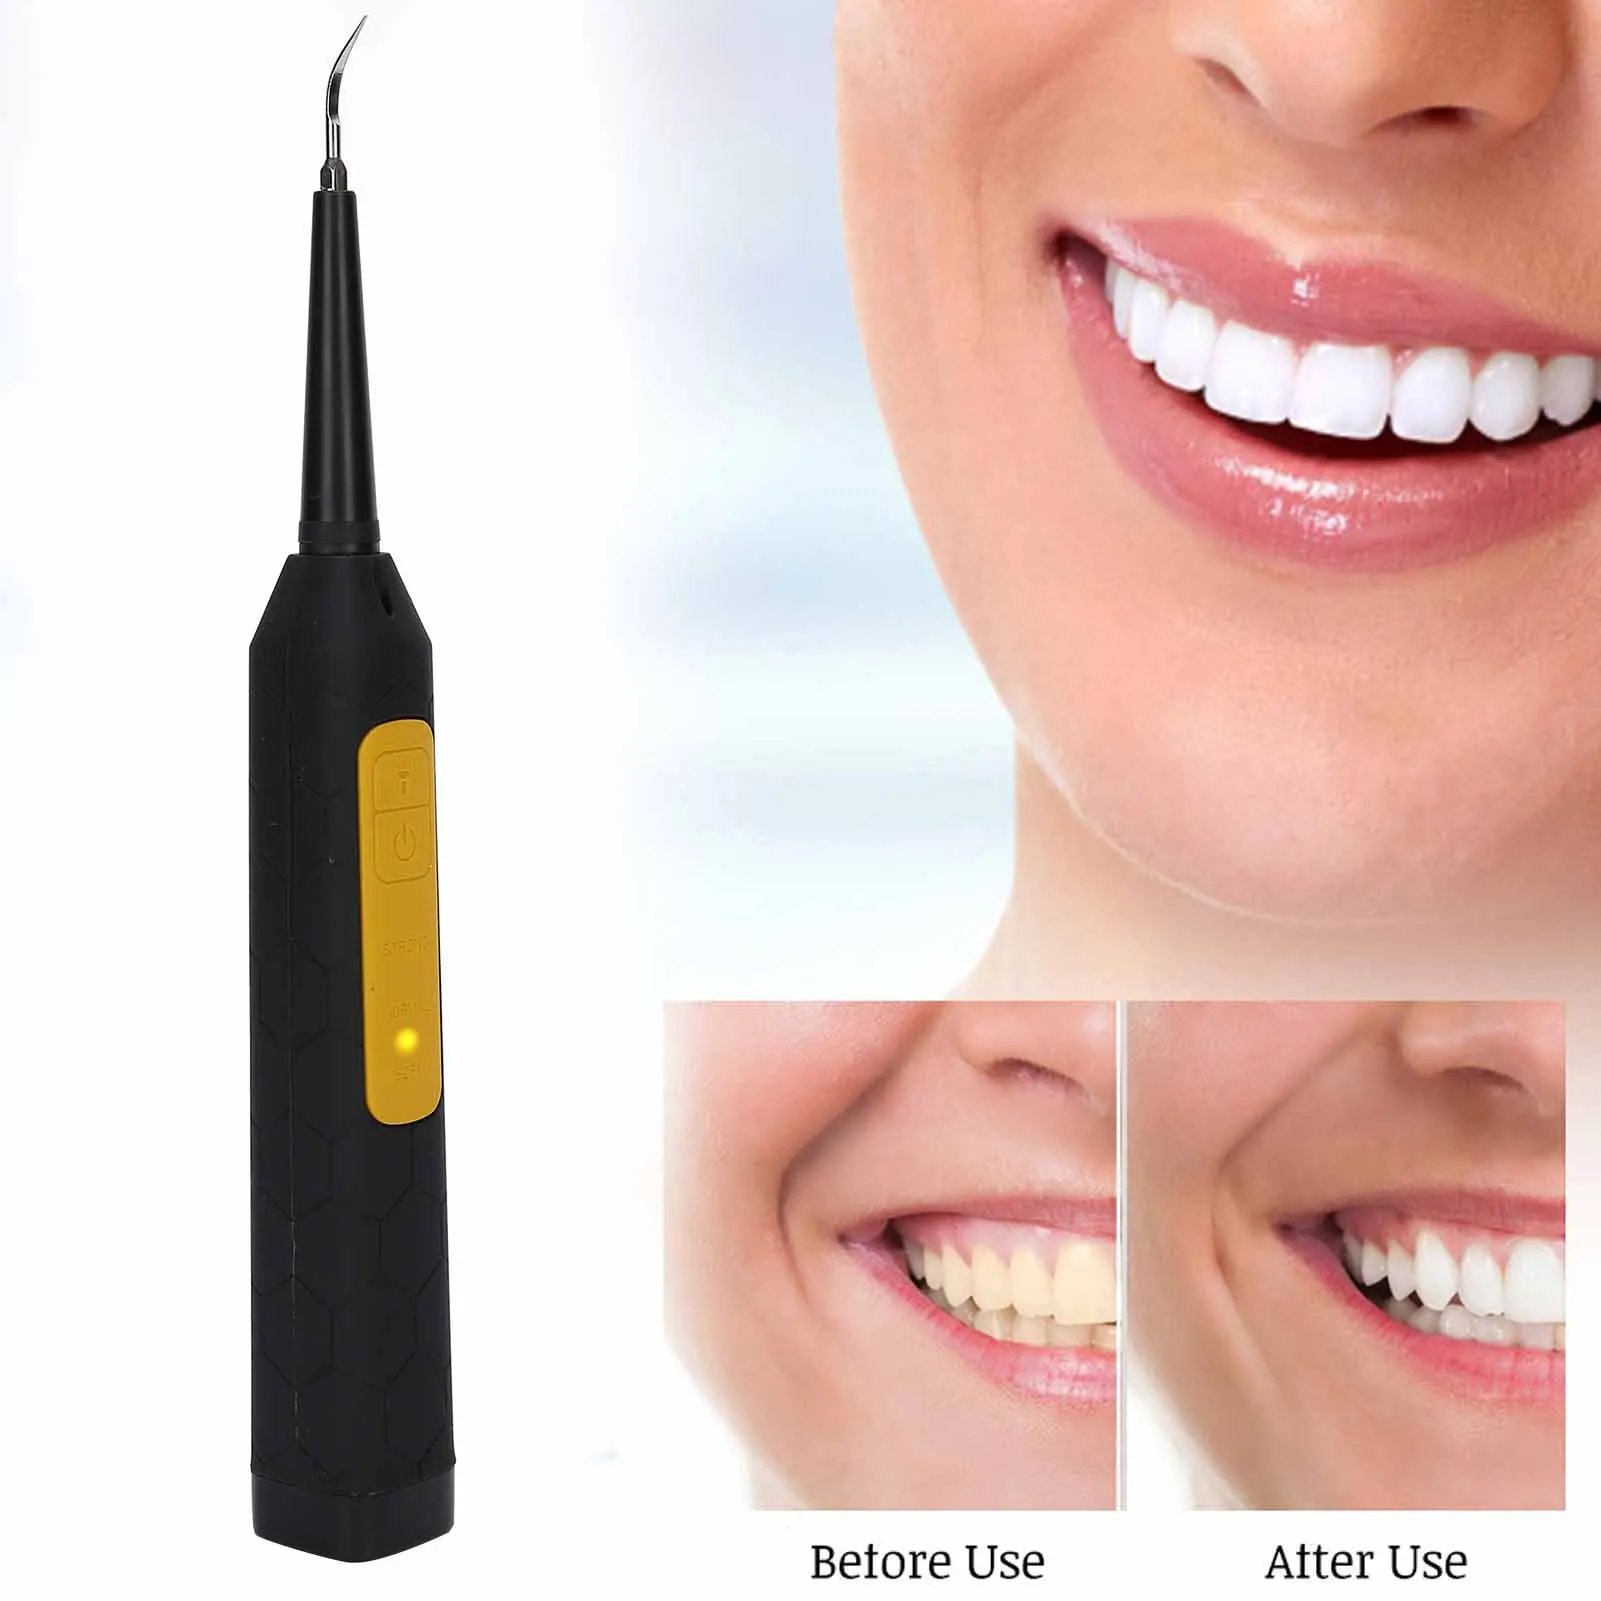 HighQuality Stainless Steel Head Tooth Cleaner Electric Calculus Remover Portable Teeth Tartar Remover Oral Care Tool USB Charg 3pcs pets teeth cleaning tool tooth scaler